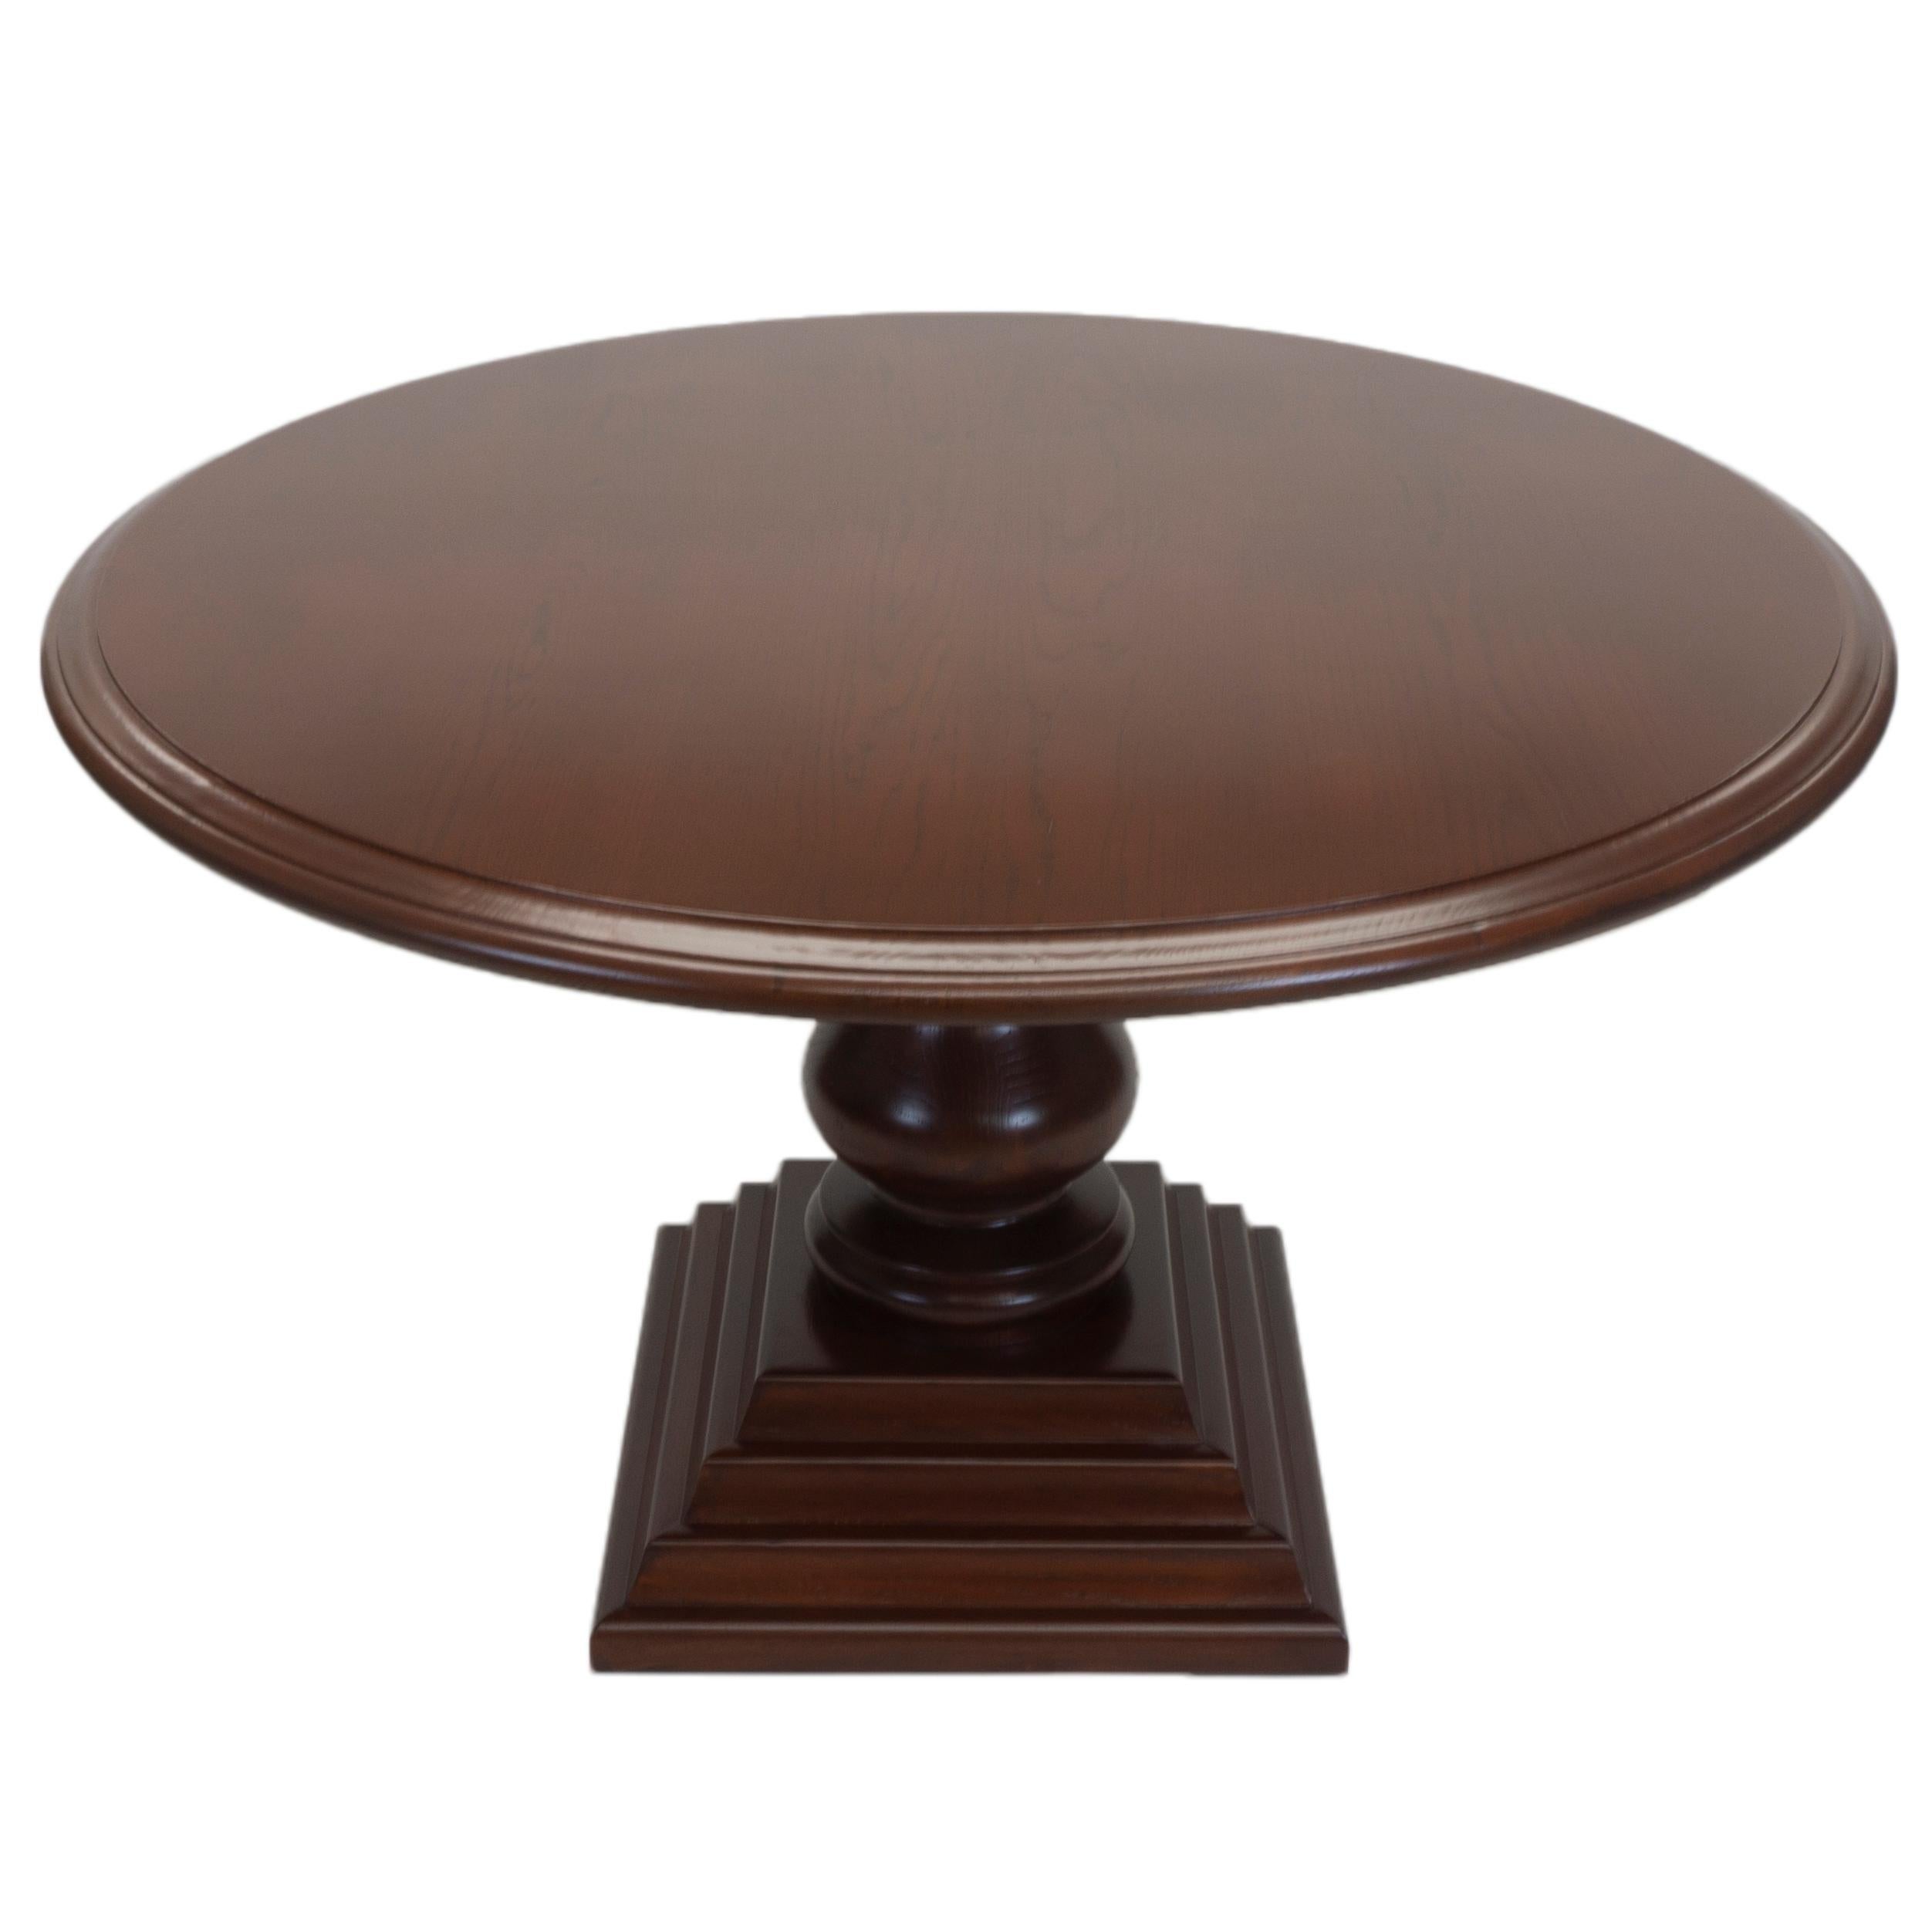 Turned Traditional Round Pedestal Dining Table For Sale